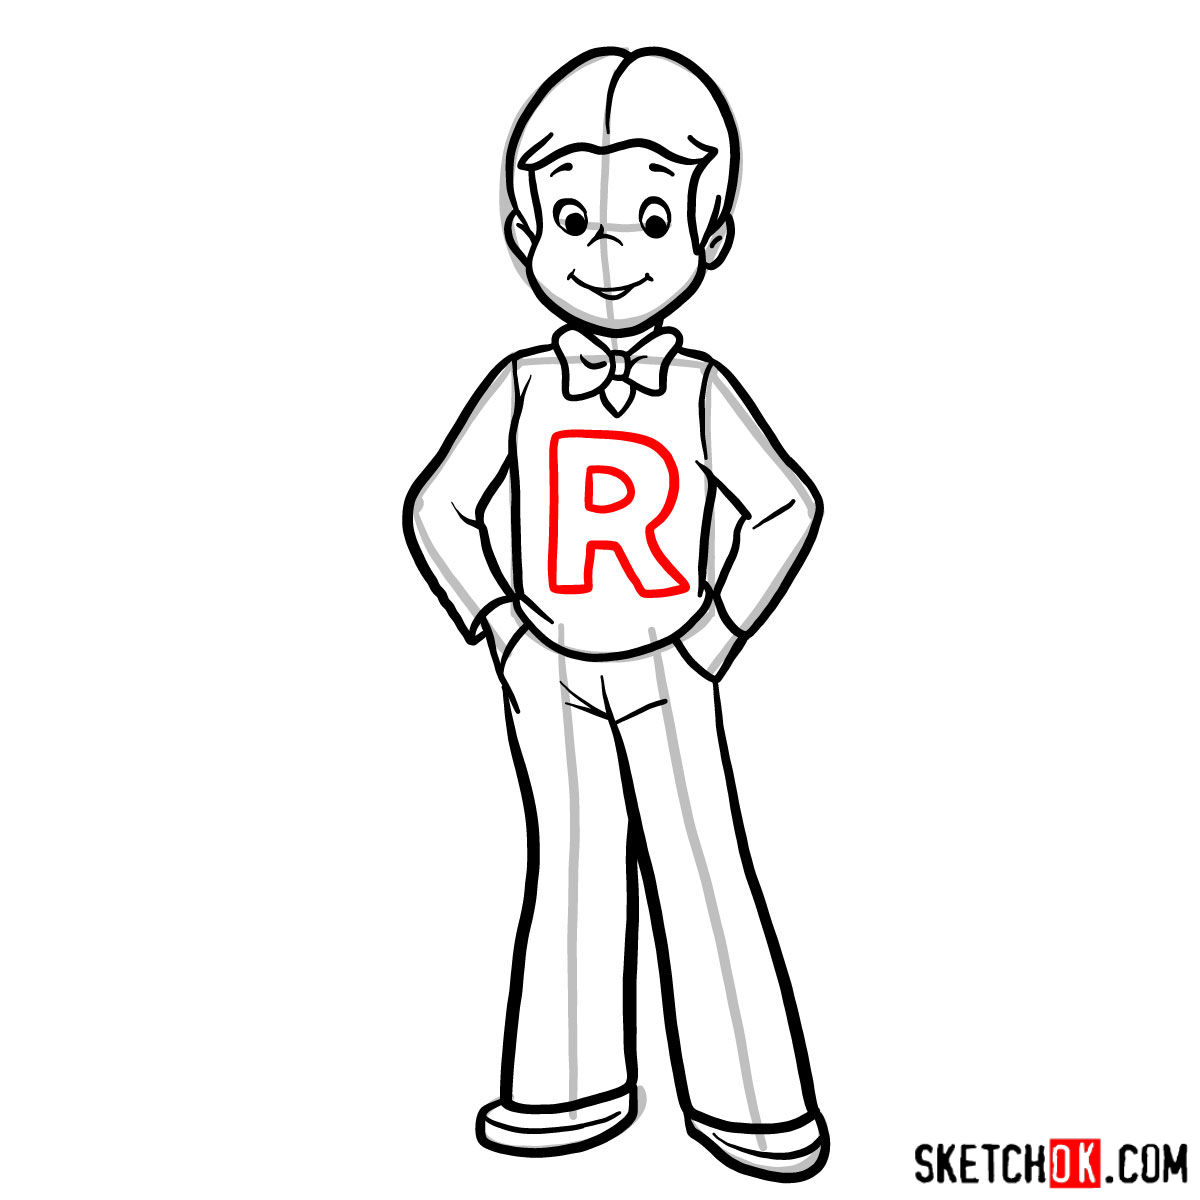 How to draw Richie Rich (cartoon style) - Sketchok easy drawing guides